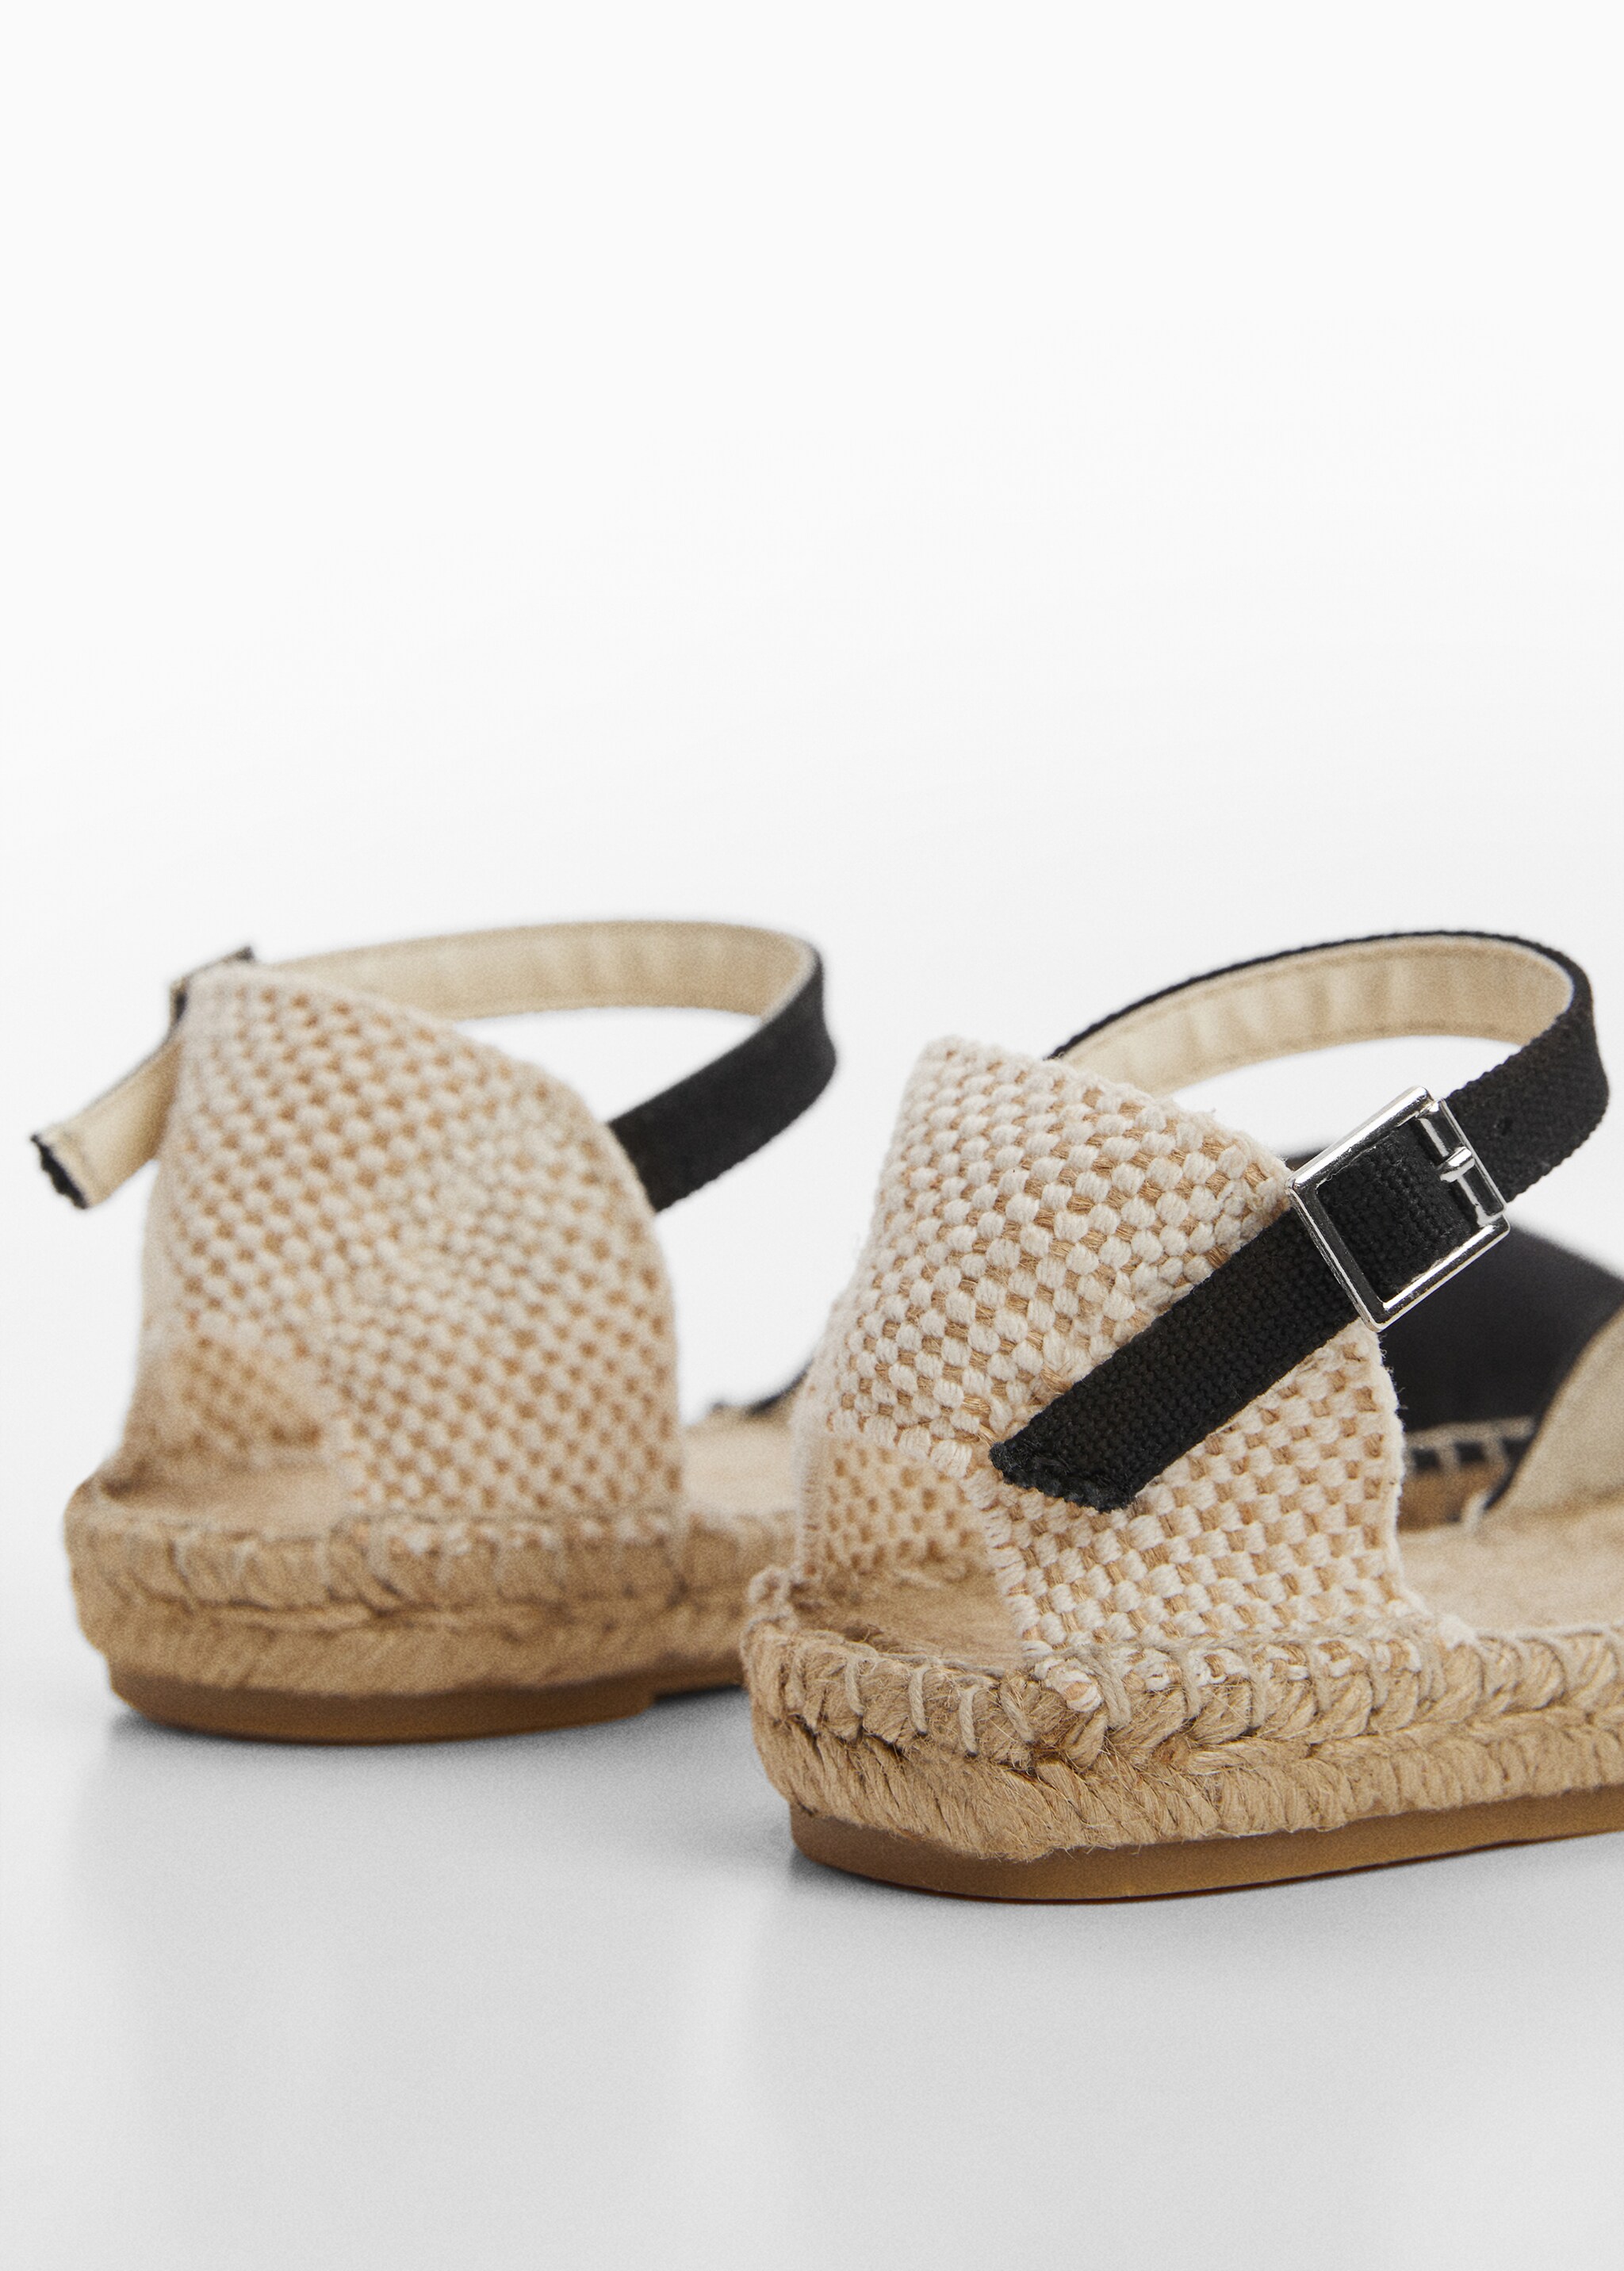 Suede espadrilles - Details of the article 1